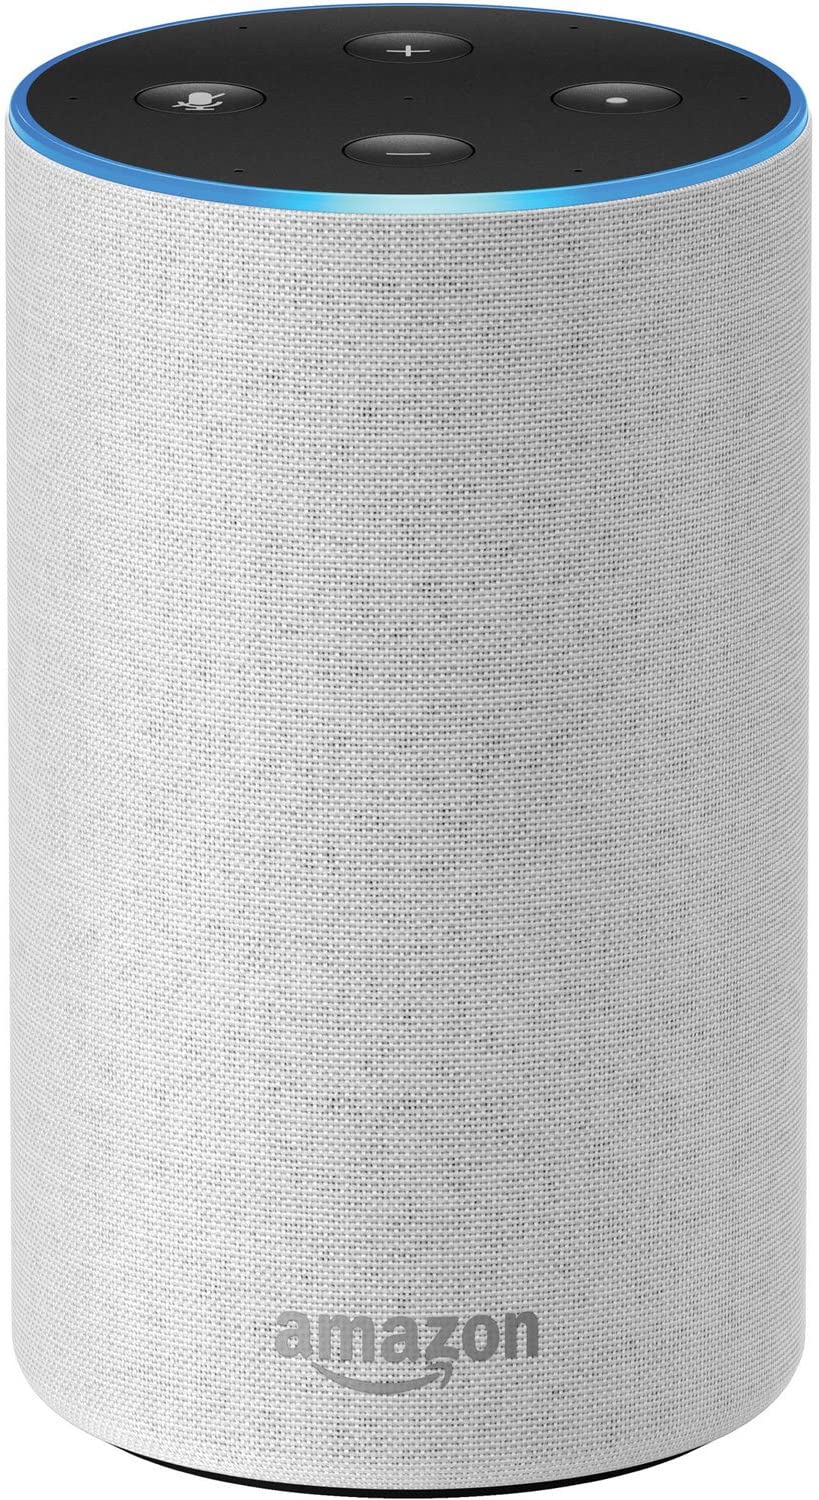 Amazon Unisex 2Nd Generation Alexa And Dolby Processing Smart Speaker Color Grey